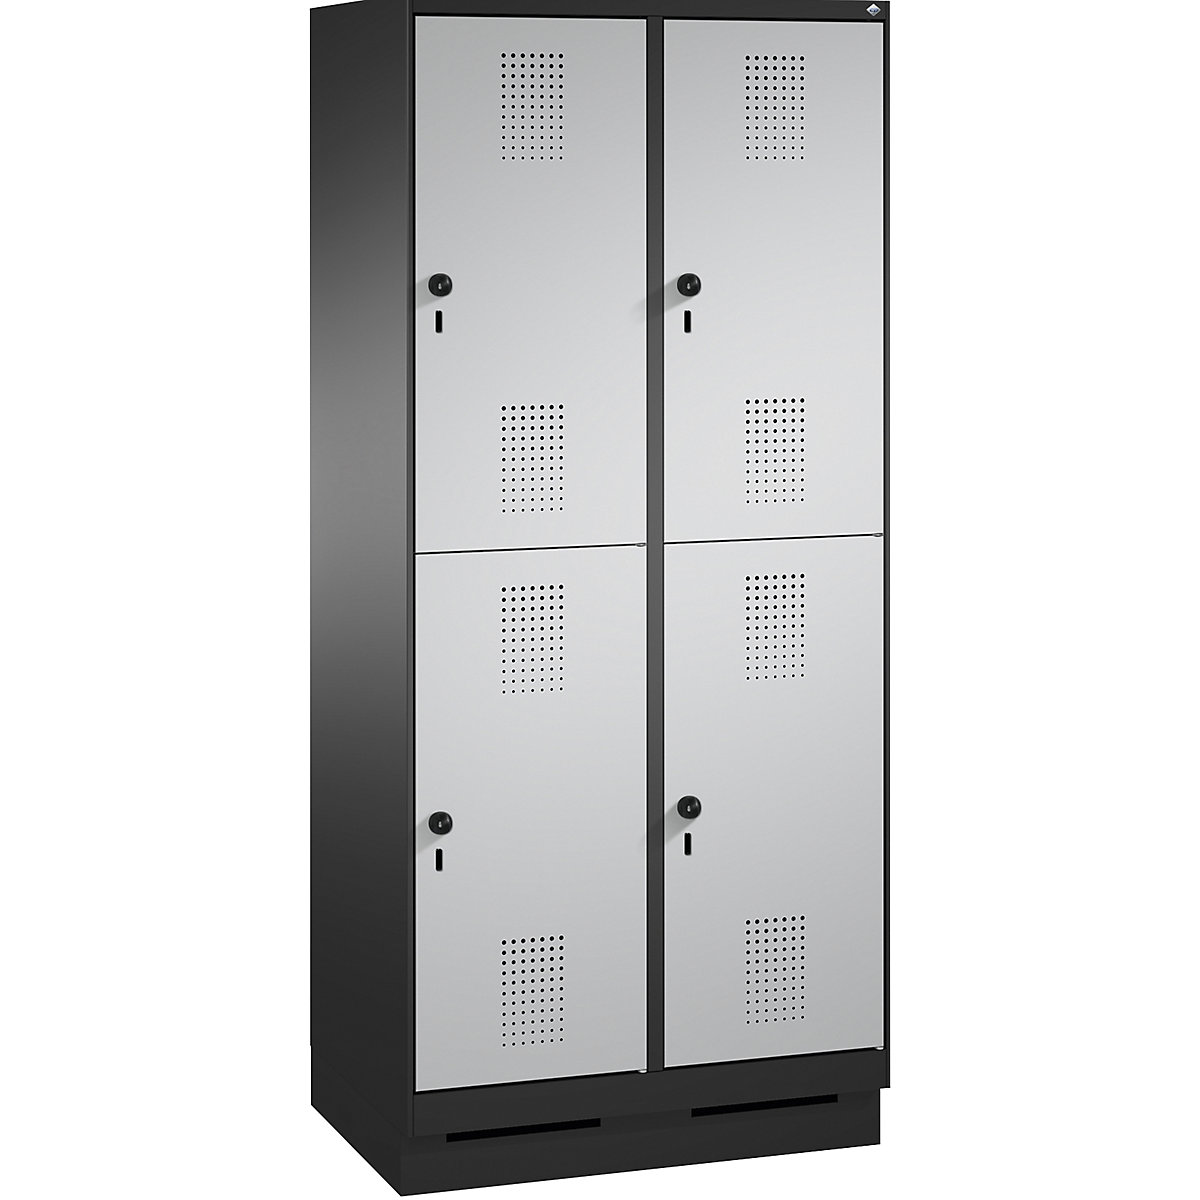 EVOLO cloakroom locker, double tier, with plinth – C+P, 2 compartments, 2 shelf compartments each, compartment width 400 mm, black grey / white aluminium-6